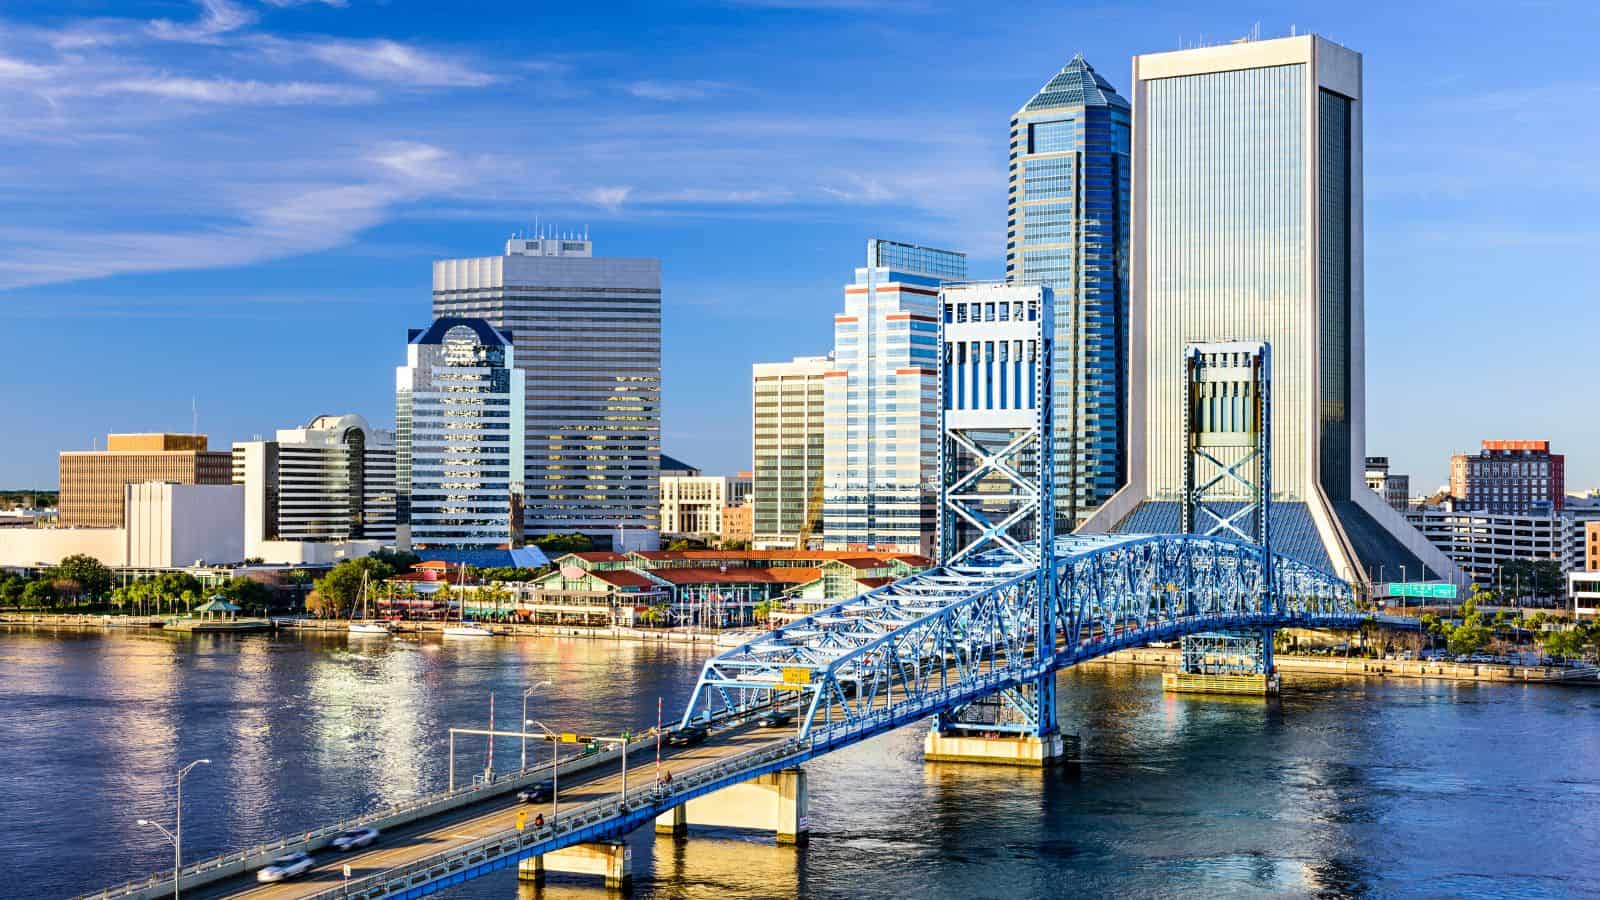 <p>According to <a href="https://eu.jacksonville.com/story/news/2023/10/12/zombie-apocalypse-attack-best-worst-cities-during-attack-of-undead/71152570007/">Jacksonville.com</a>, the city has several strategic advantages—excellent transport links, including a deepwater port, multiple military bases, natural barriers (extensive waterways), good access to agricultural land, a low population density, and a high number of weapons shops and medical centers per capita. All of these would help with survival, escape, and defense.</p>